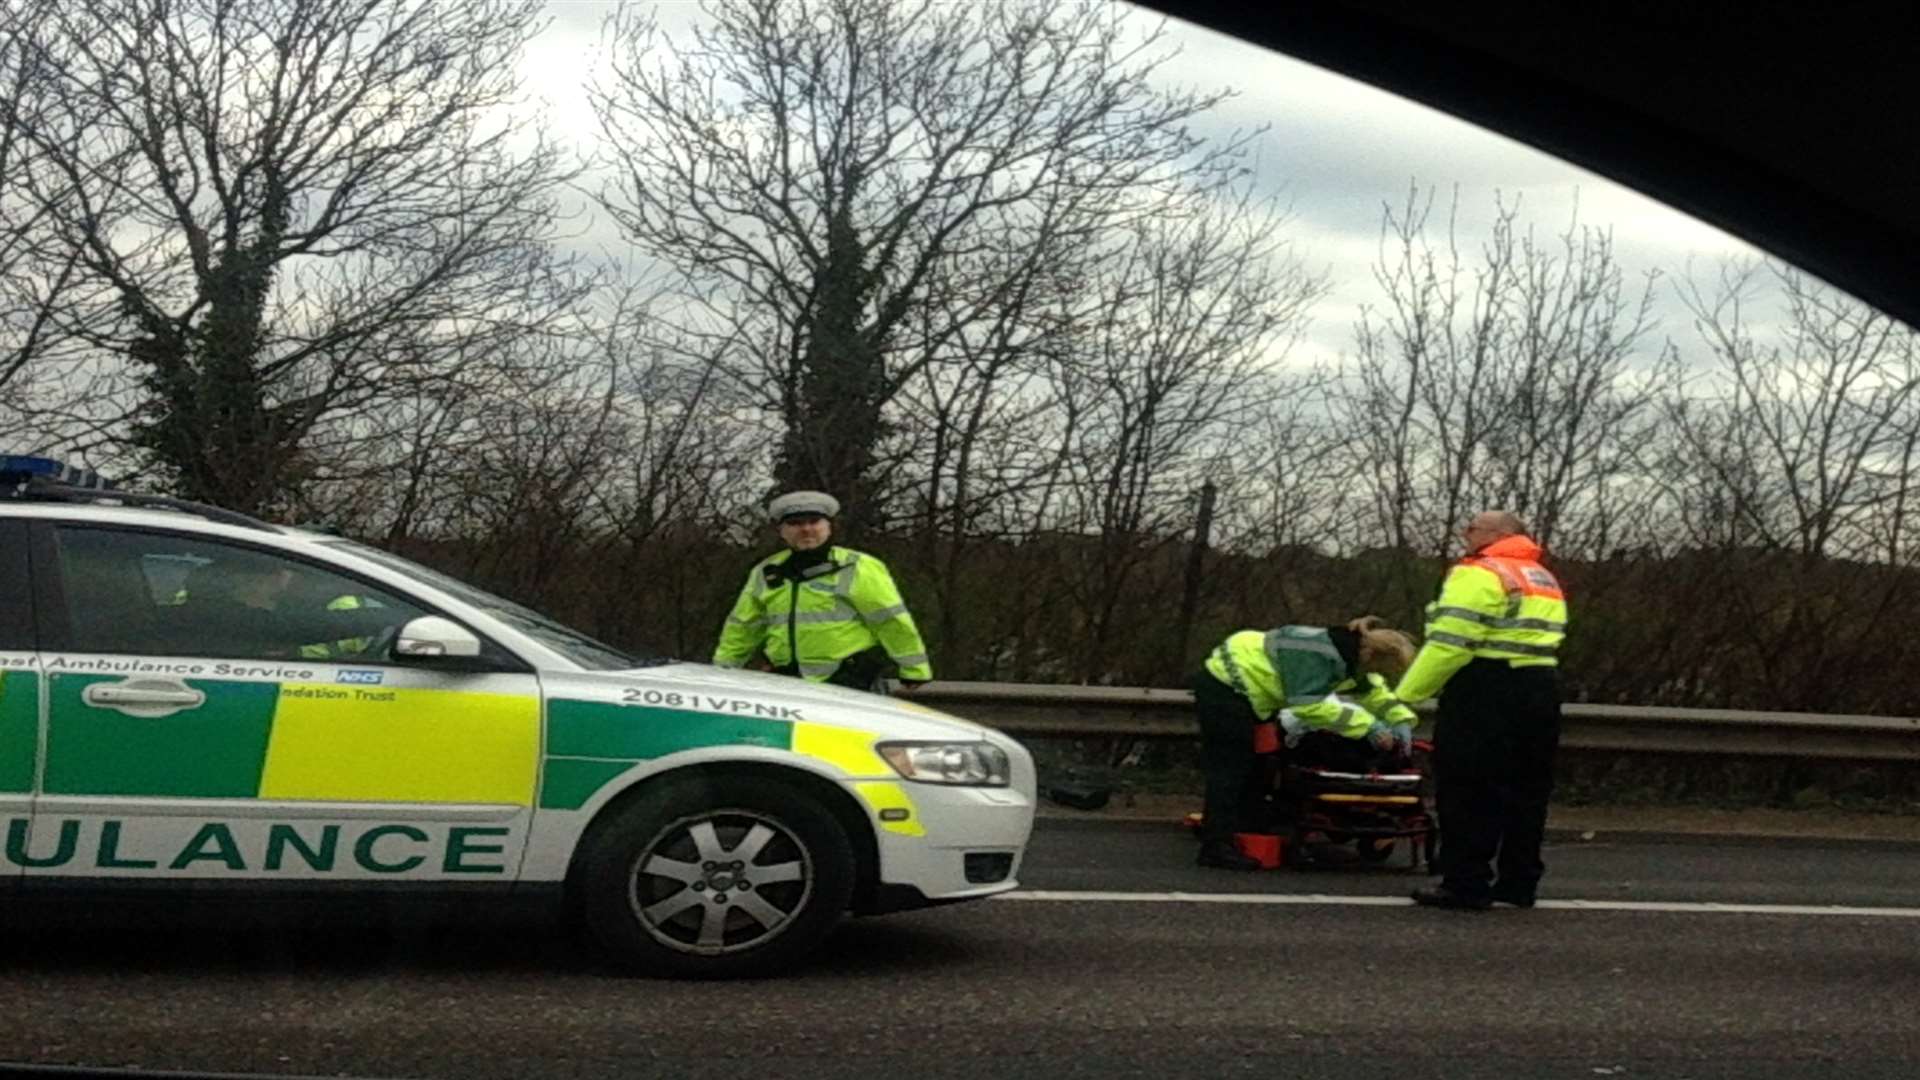 Paramedics treat a casualty as traffic builds up on the M25 due to high winds